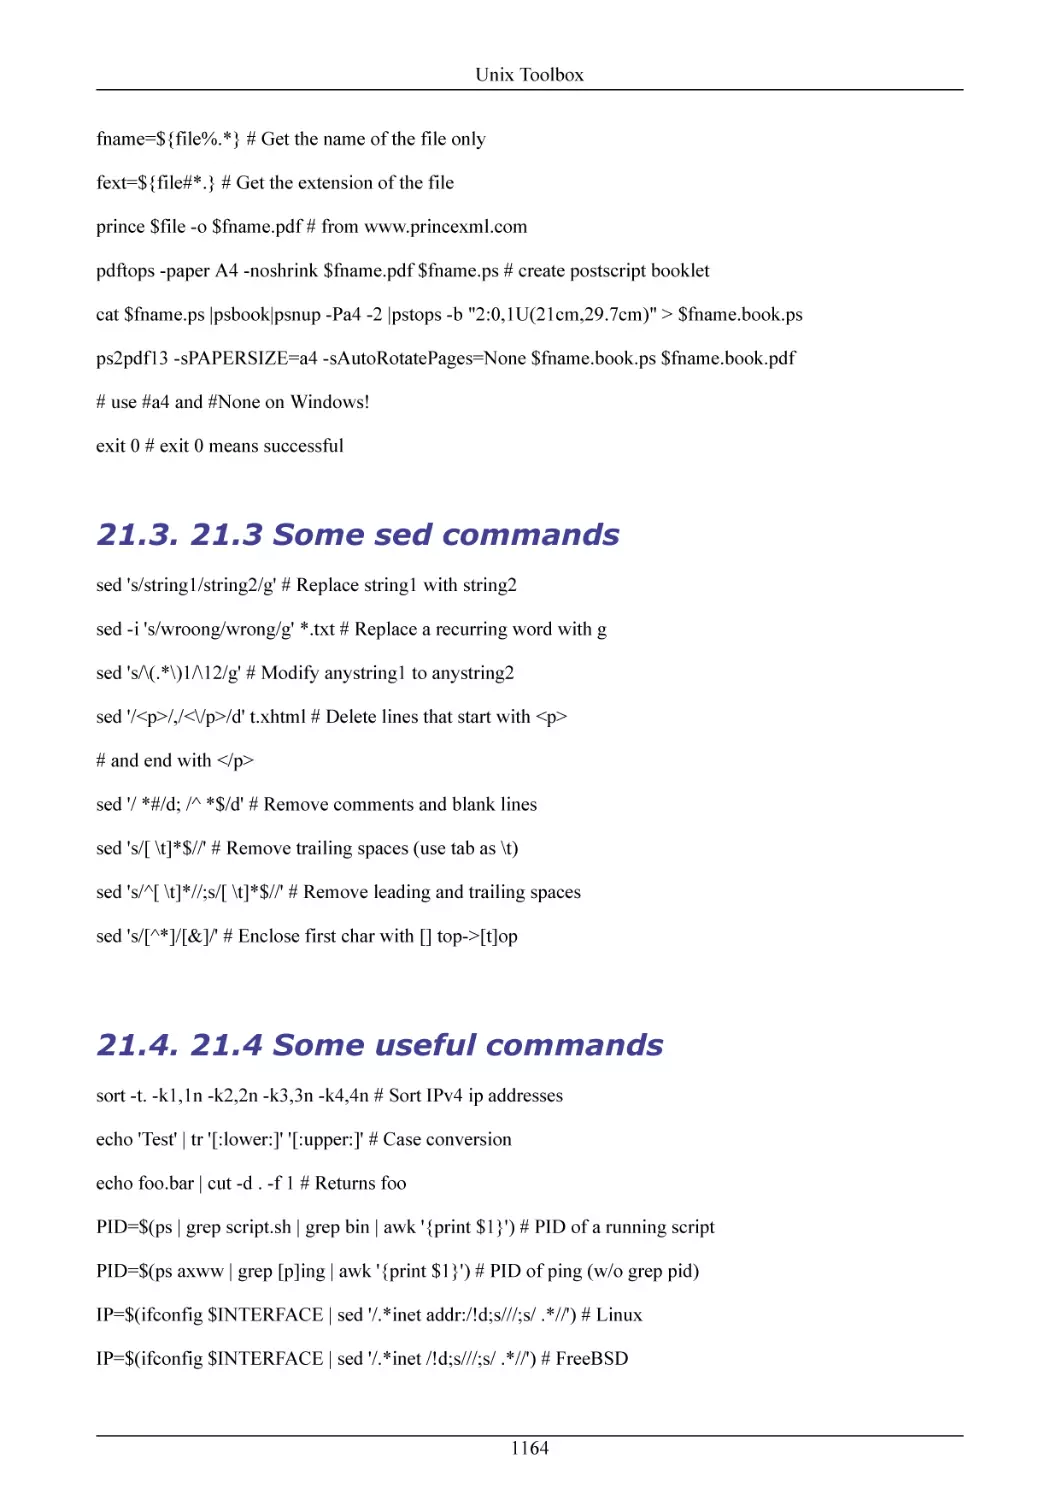 21.3 Some sed commands
21.4 Some useful commands